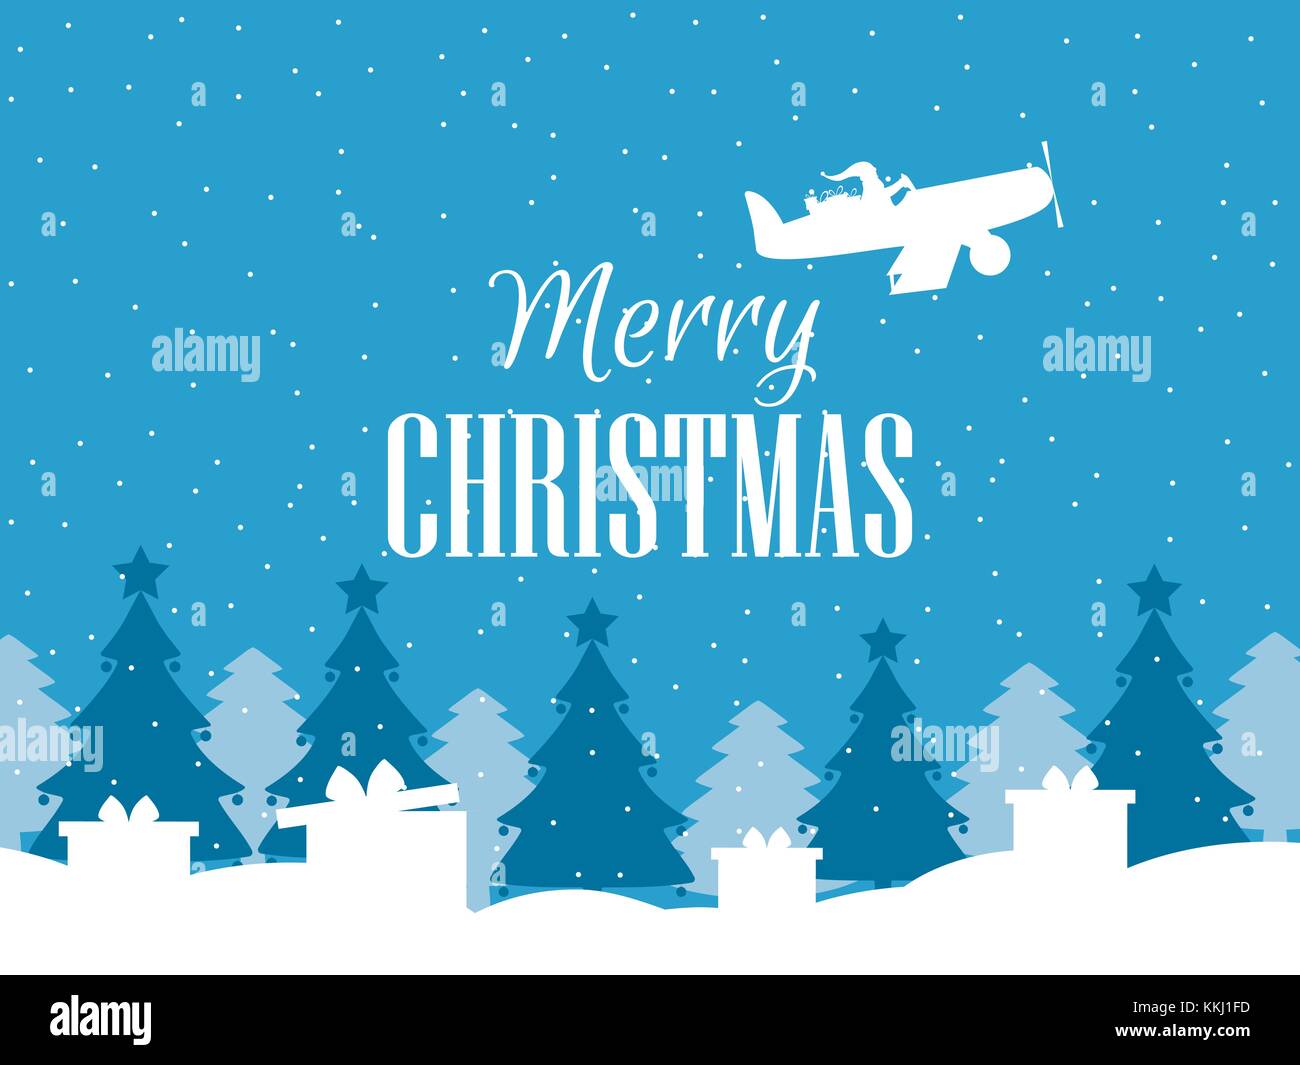 Merry Christmas Santa Claus flies on an airplane and throws presents Winter background with